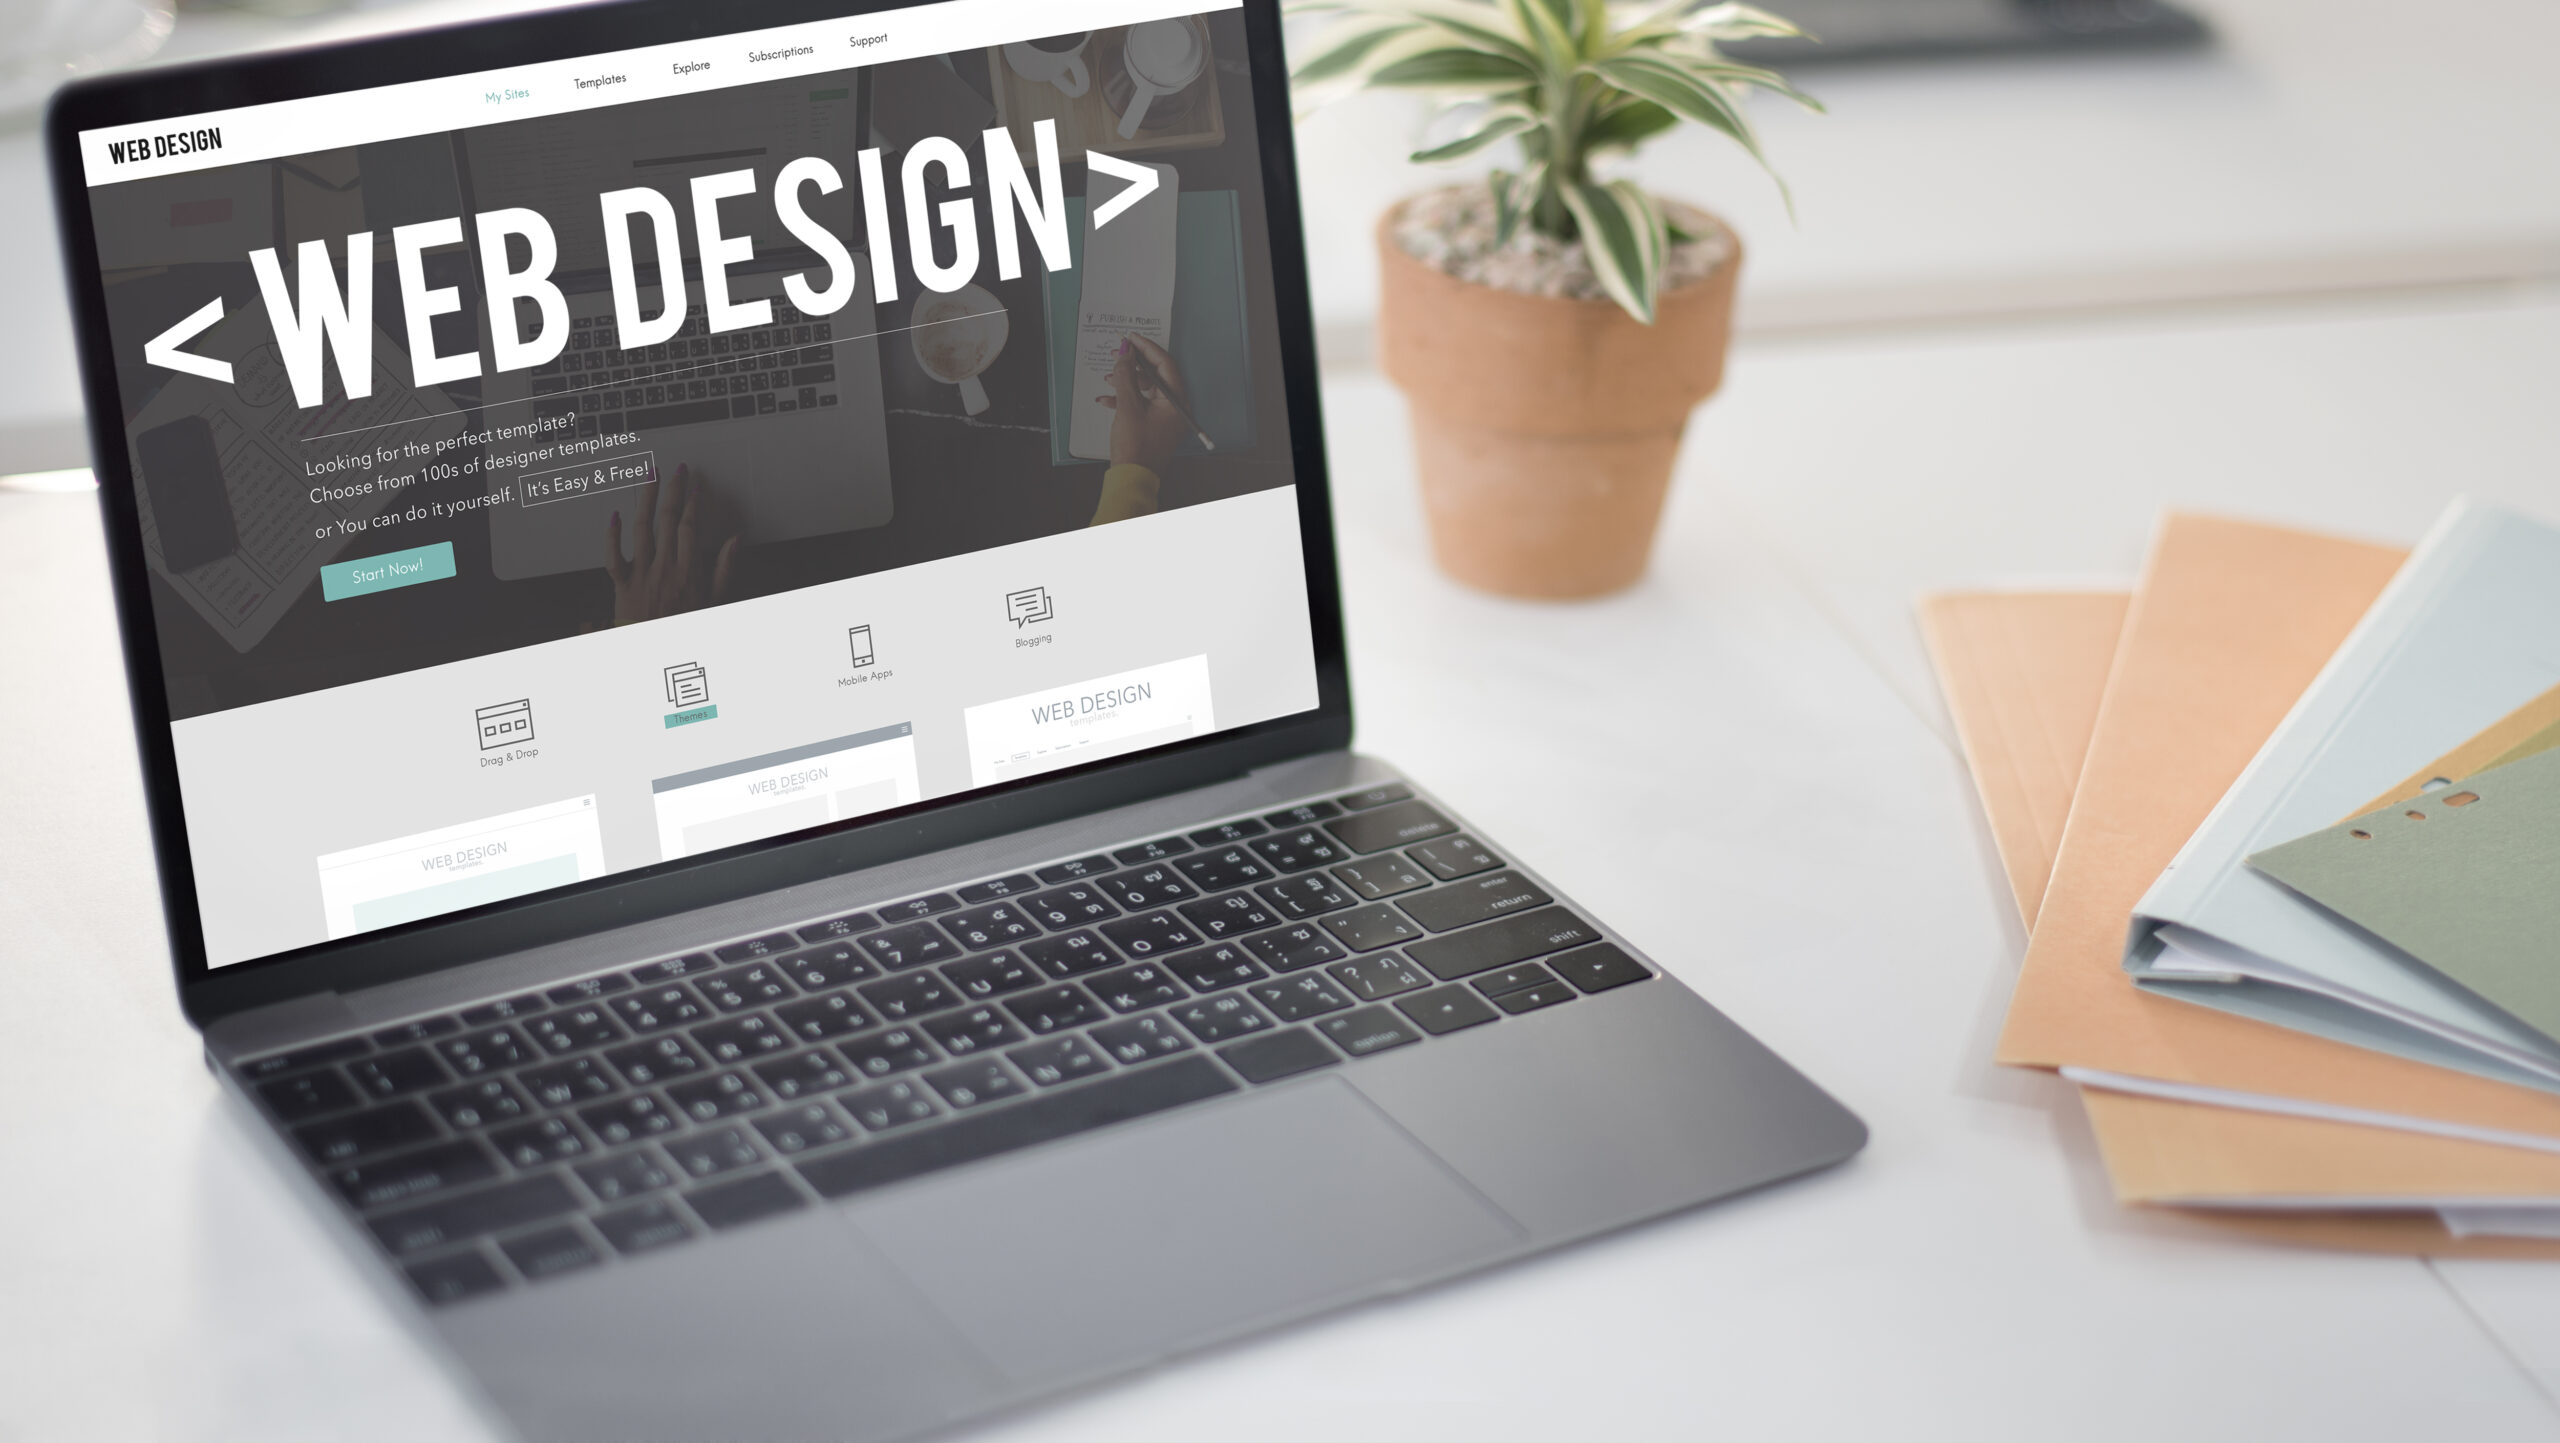 Seven steps to the process of web design